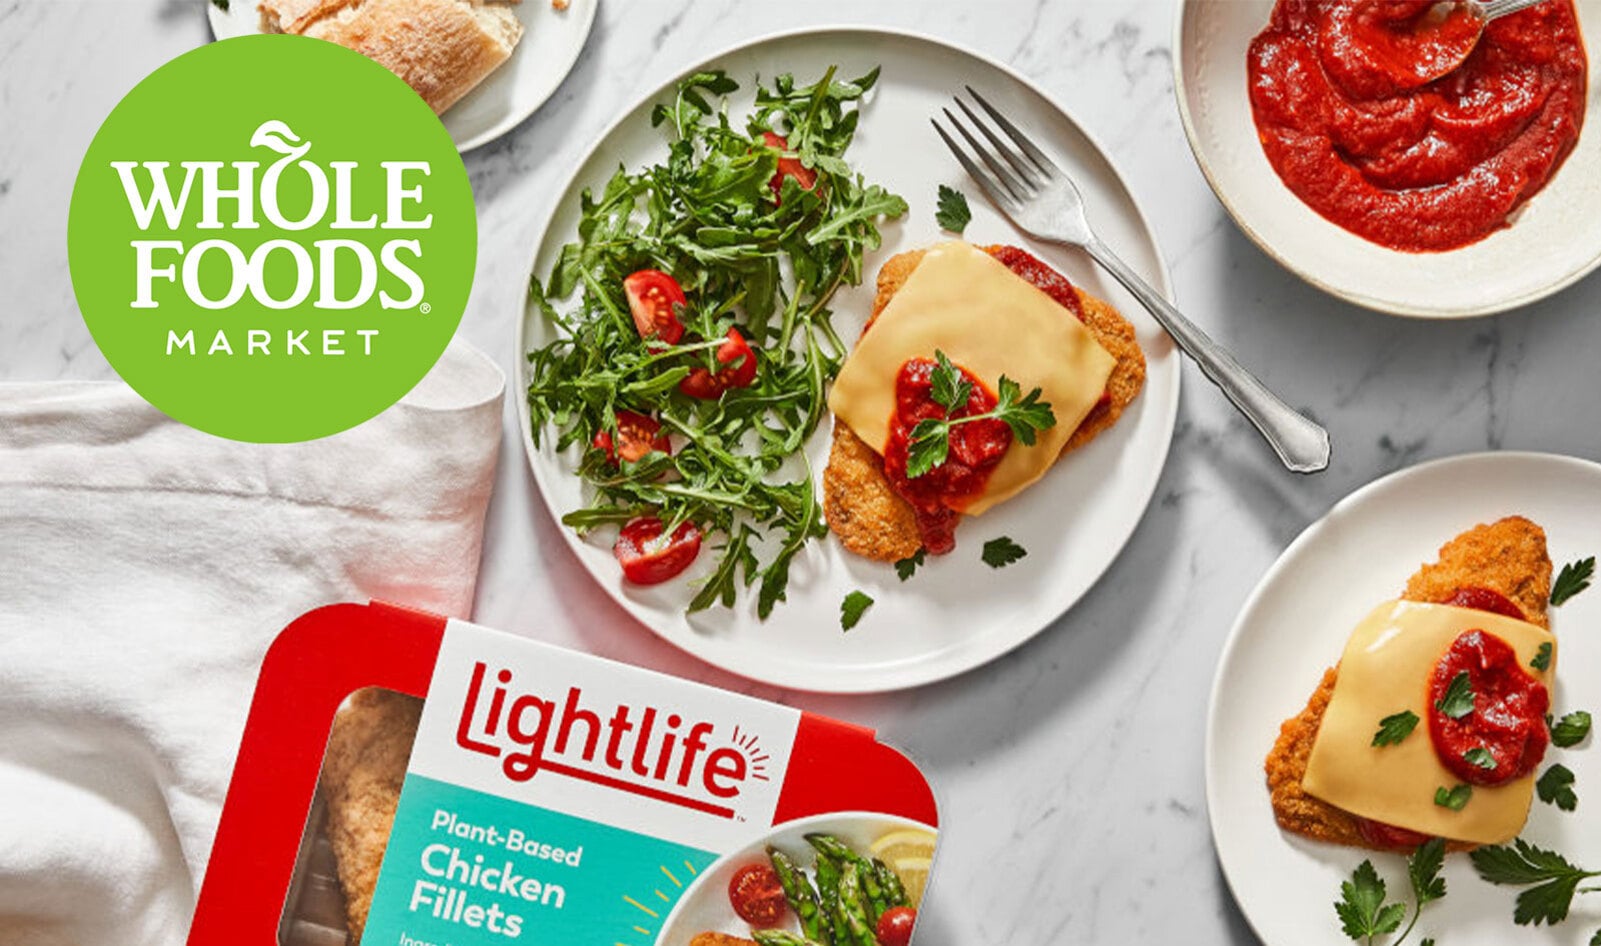 Lightlife Debuts Its Most Realistic Vegan Chicken at 500 Whole Foods Hot Bars